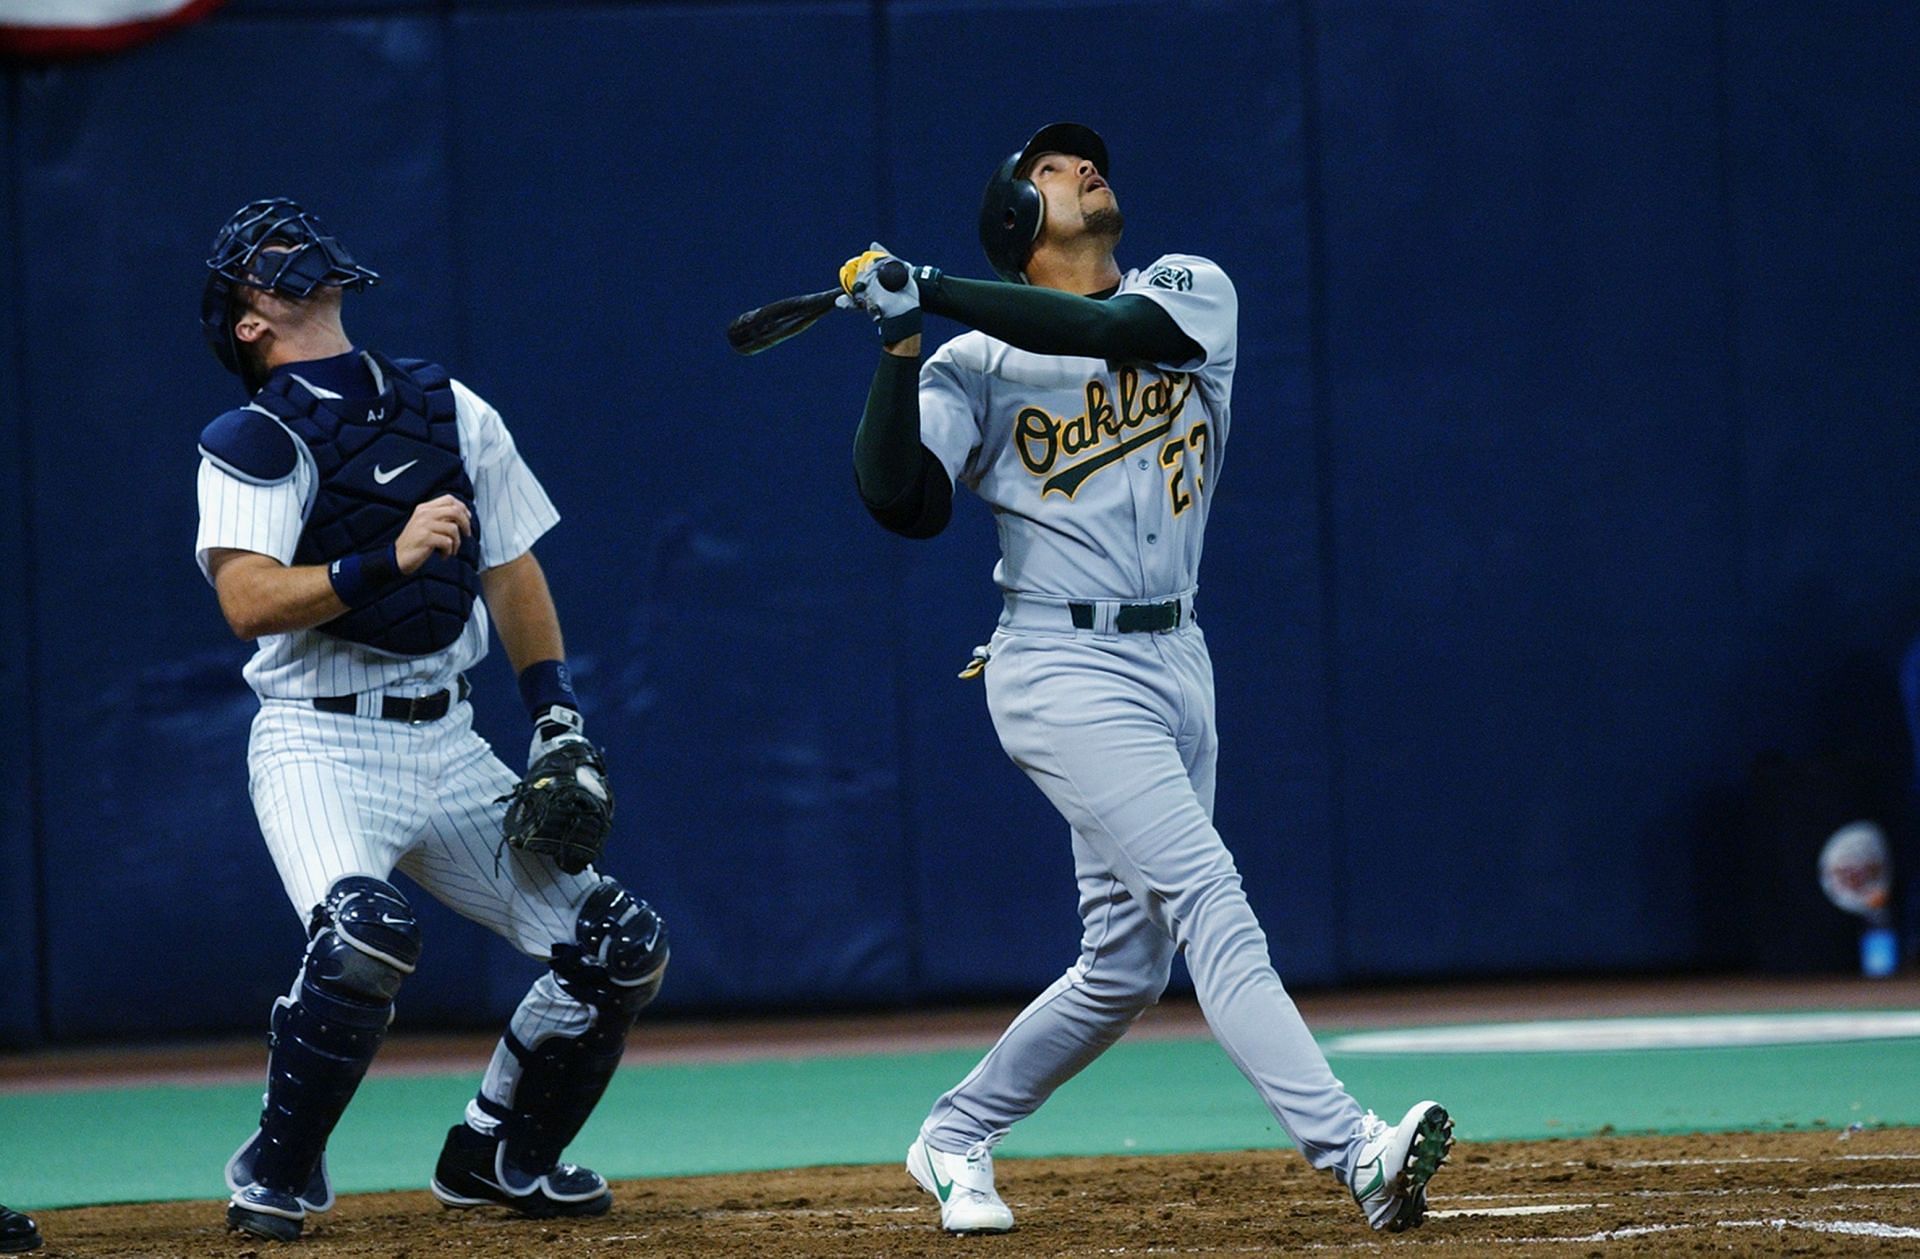 David Justice hits a fly ball: MINNEAPOLIS, MN - OCTOBER 5: David Justice #23 of the Oakland Athletics hits a fly ball during the American League Division Series against the Minnesota Twins on October 5, 2002, at the Hubert H Humphrey Dome in Minneapolis, Minnesota. (Photo by Matthew Stockman/Getty Images)